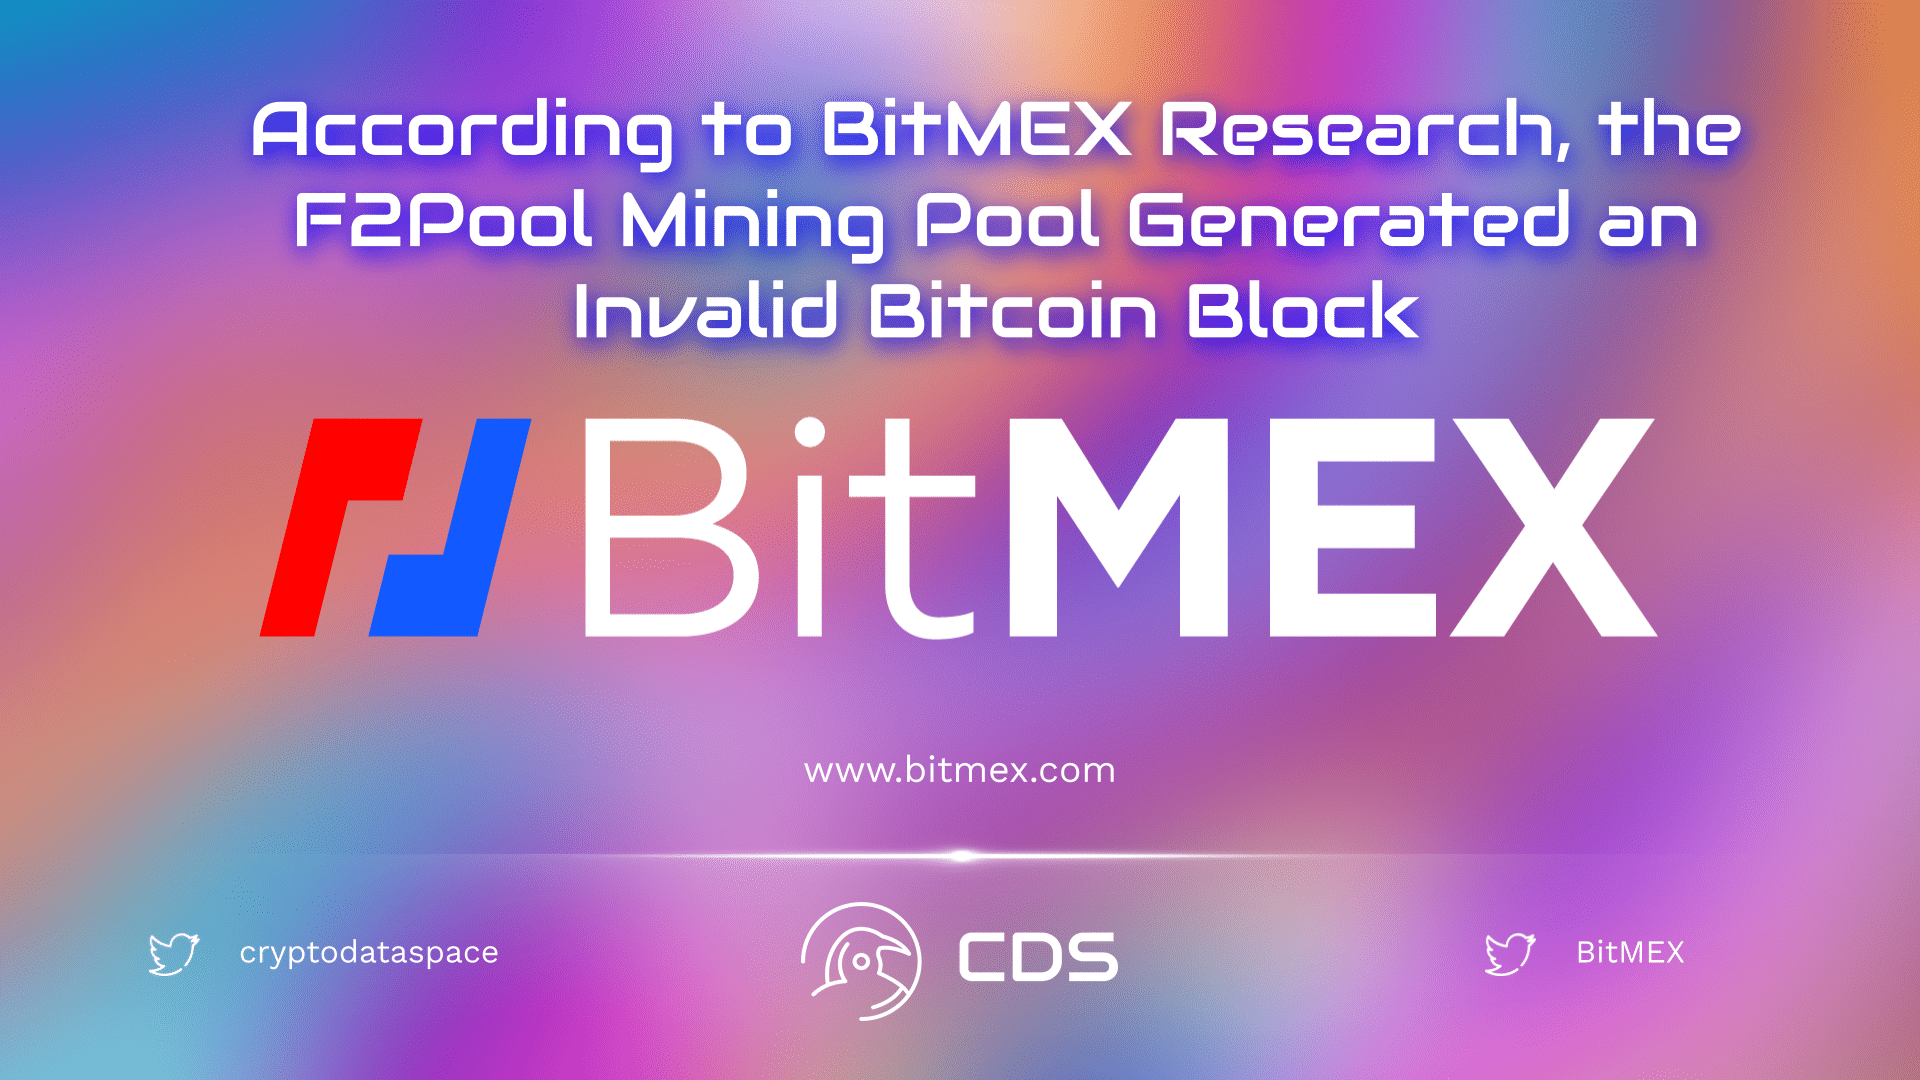 According to BitMEX Research, the F2Pool Mining Pool Generated an Invalid Bitcoin Block